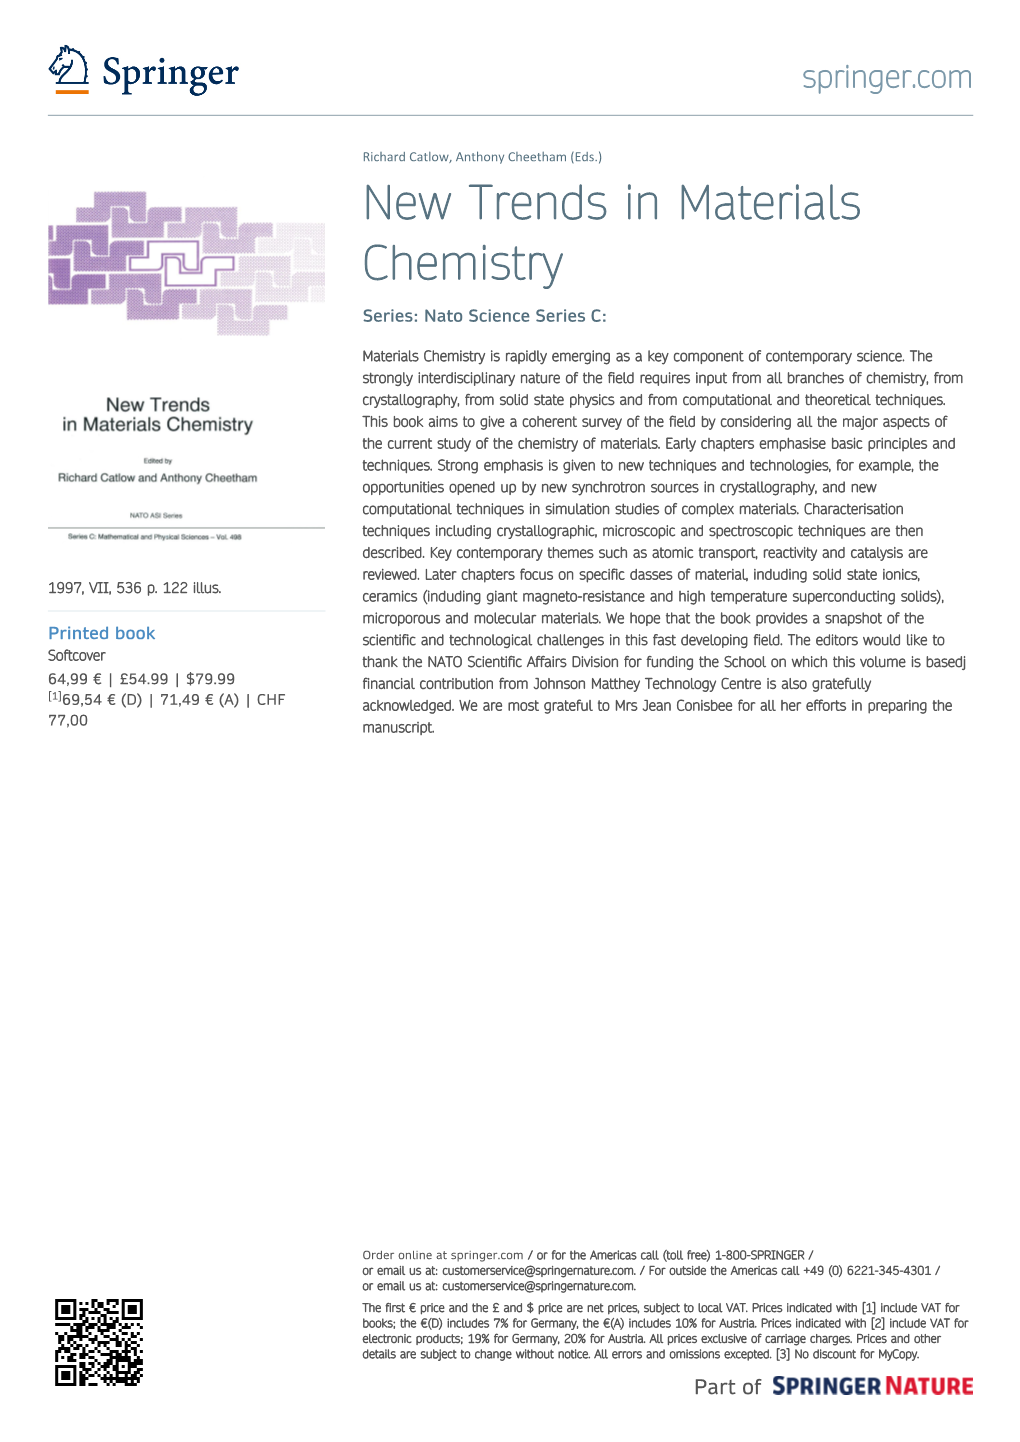 New Trends in Materials Chemistry Series: Nato Science Series C